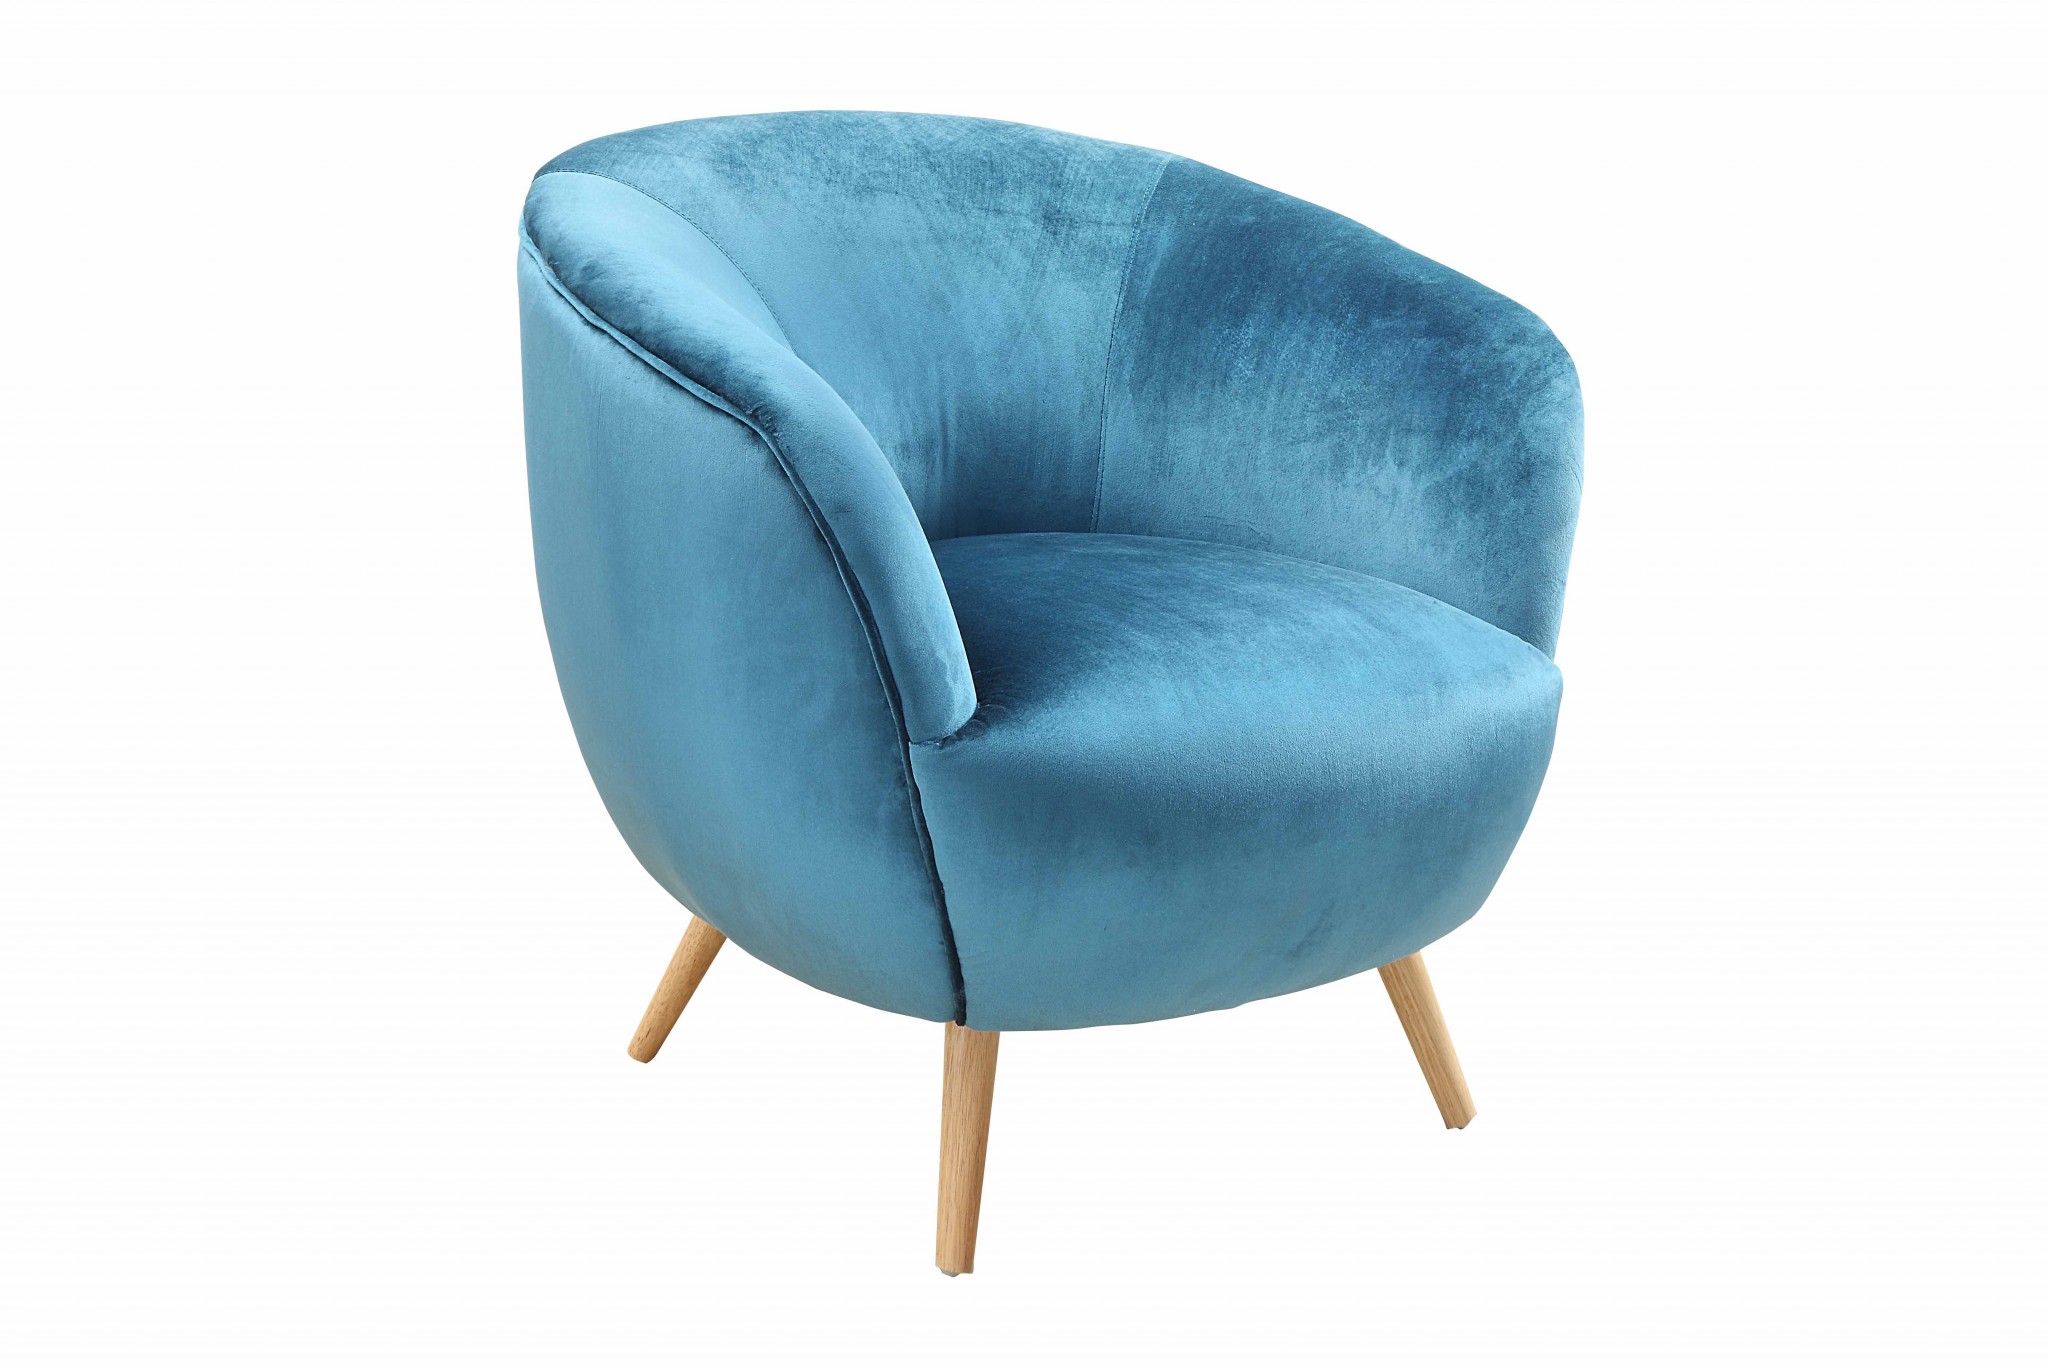 Teal Velvet Armed Accent Chair with Natural Finish Wood legs